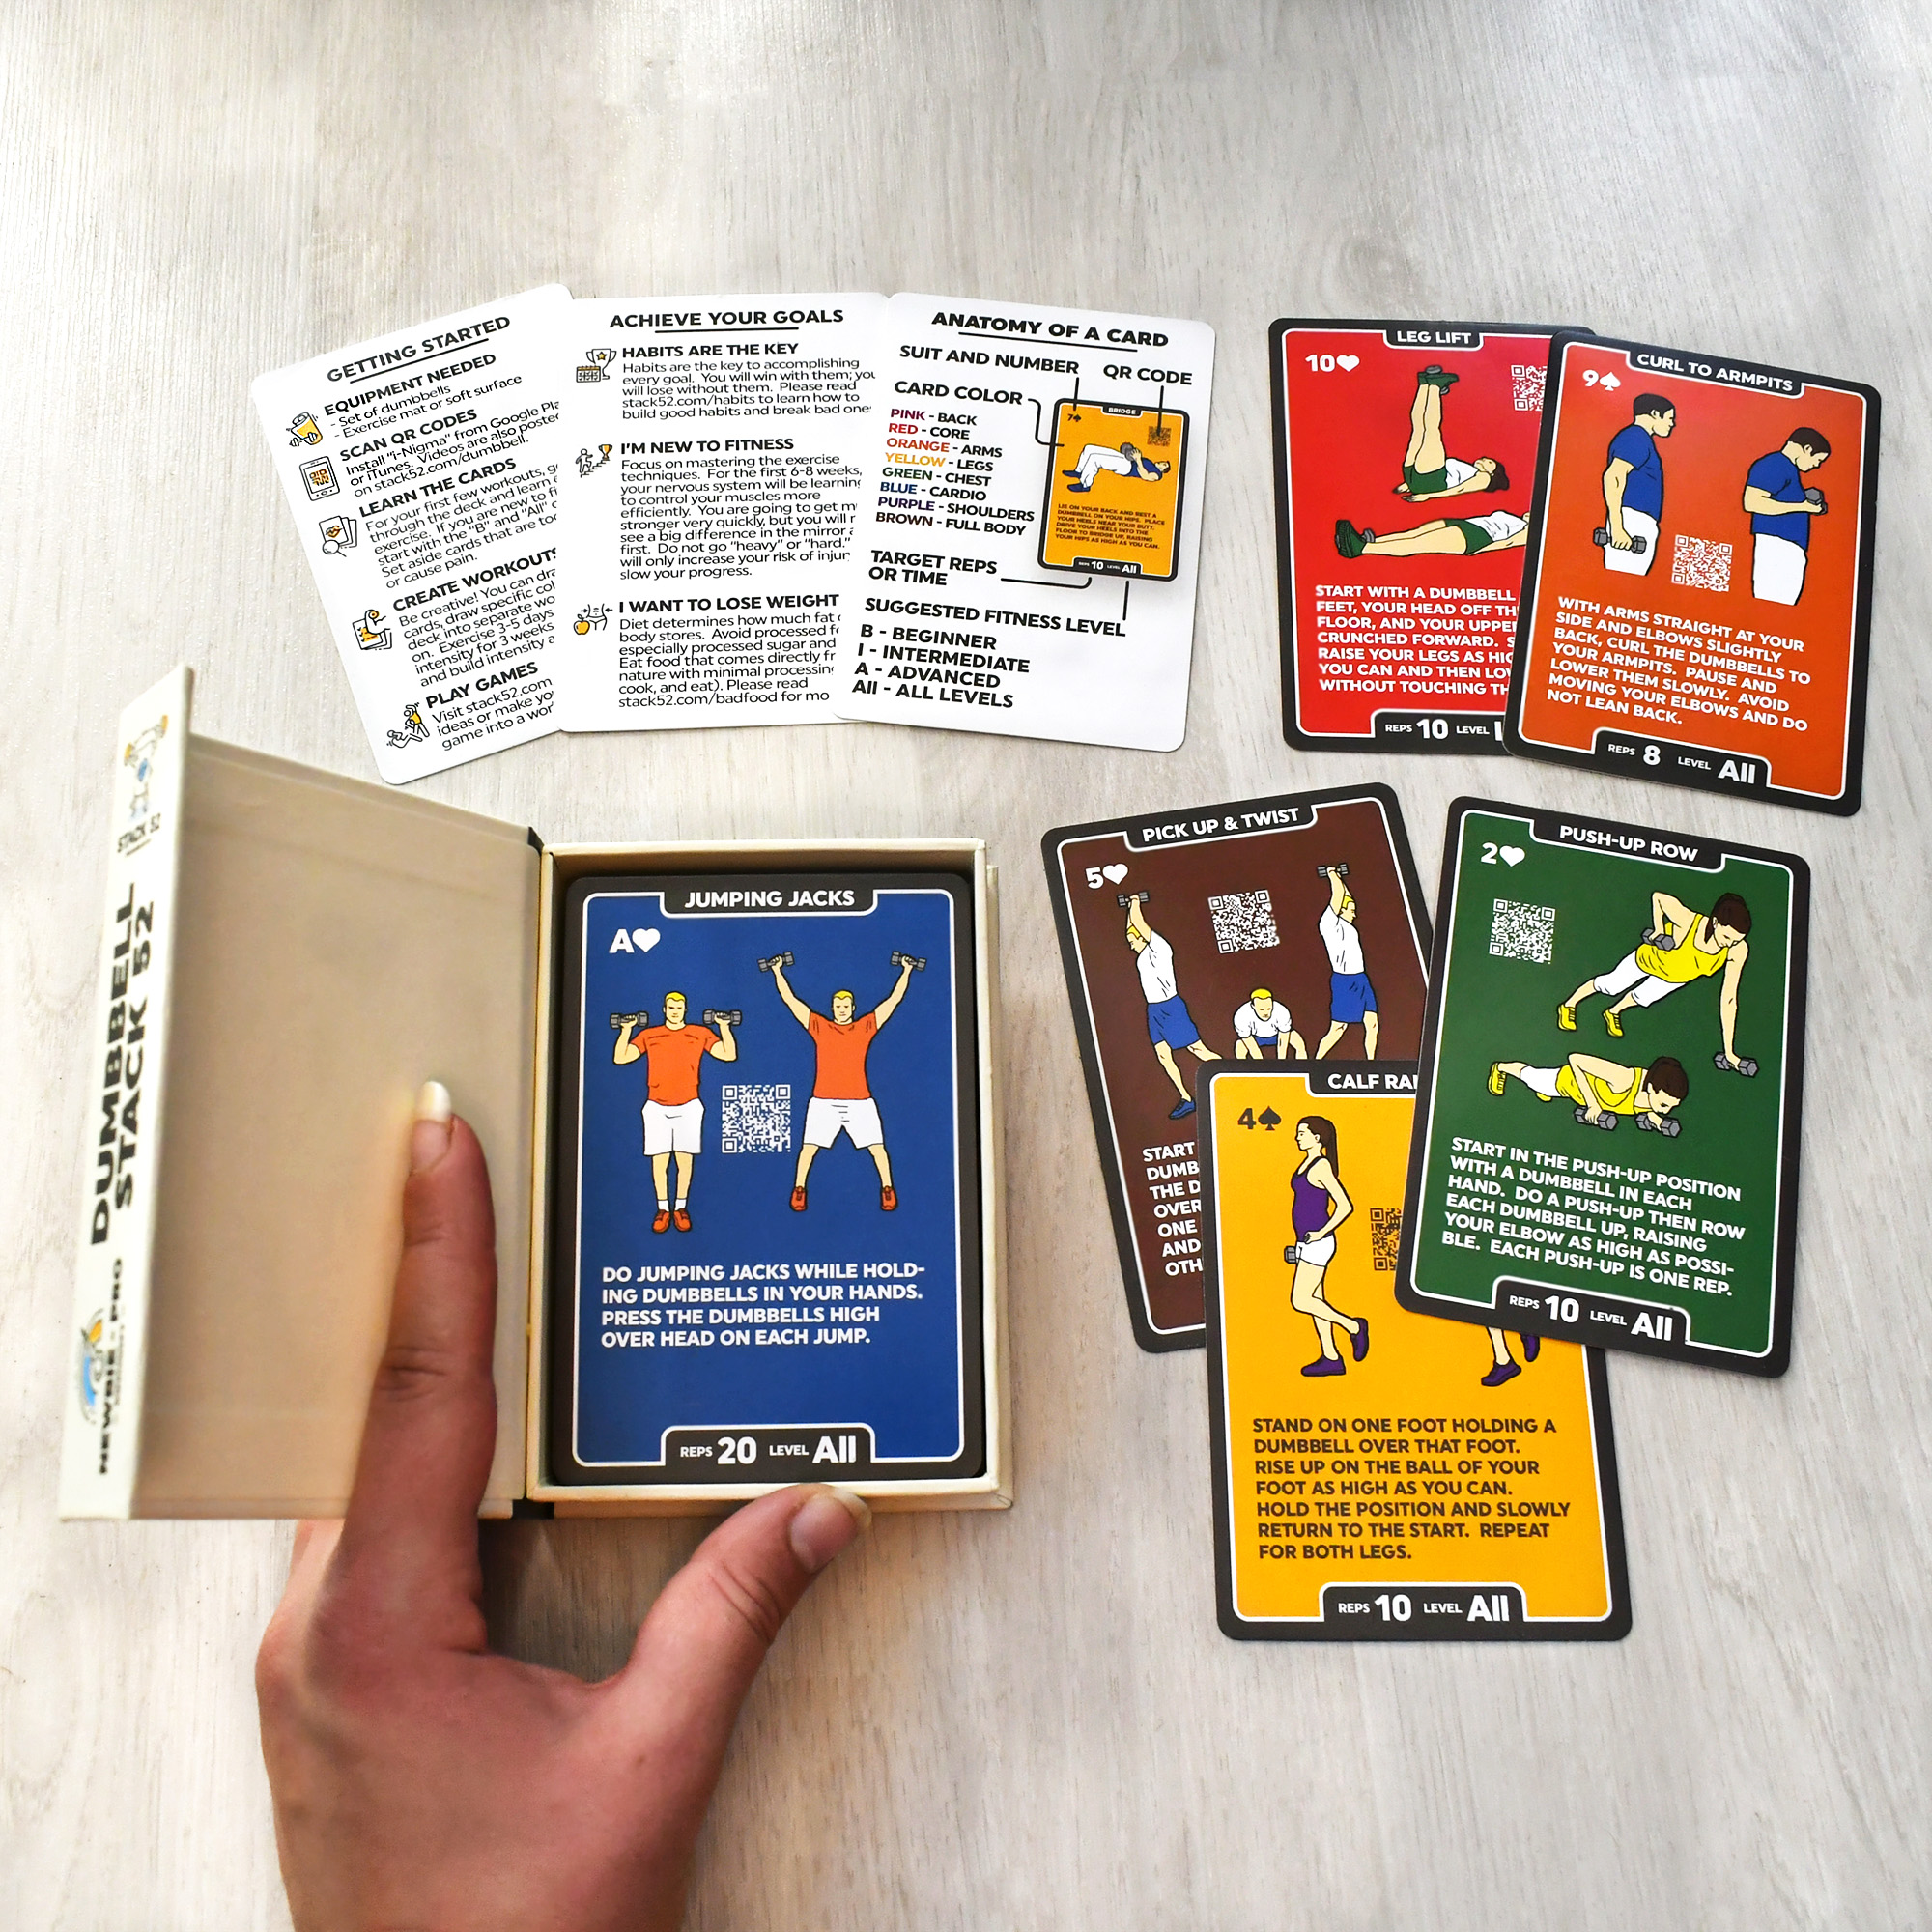 Stack 52 Dumbbell Exercise Cards. Dumbbell Workout Playing Card Game. Video Instructions Included. Perfect for Training with Adjustable Dumbbell Free Weight Sets and Home Gym Fitness. (2019 Base Deck) - image 2 of 6